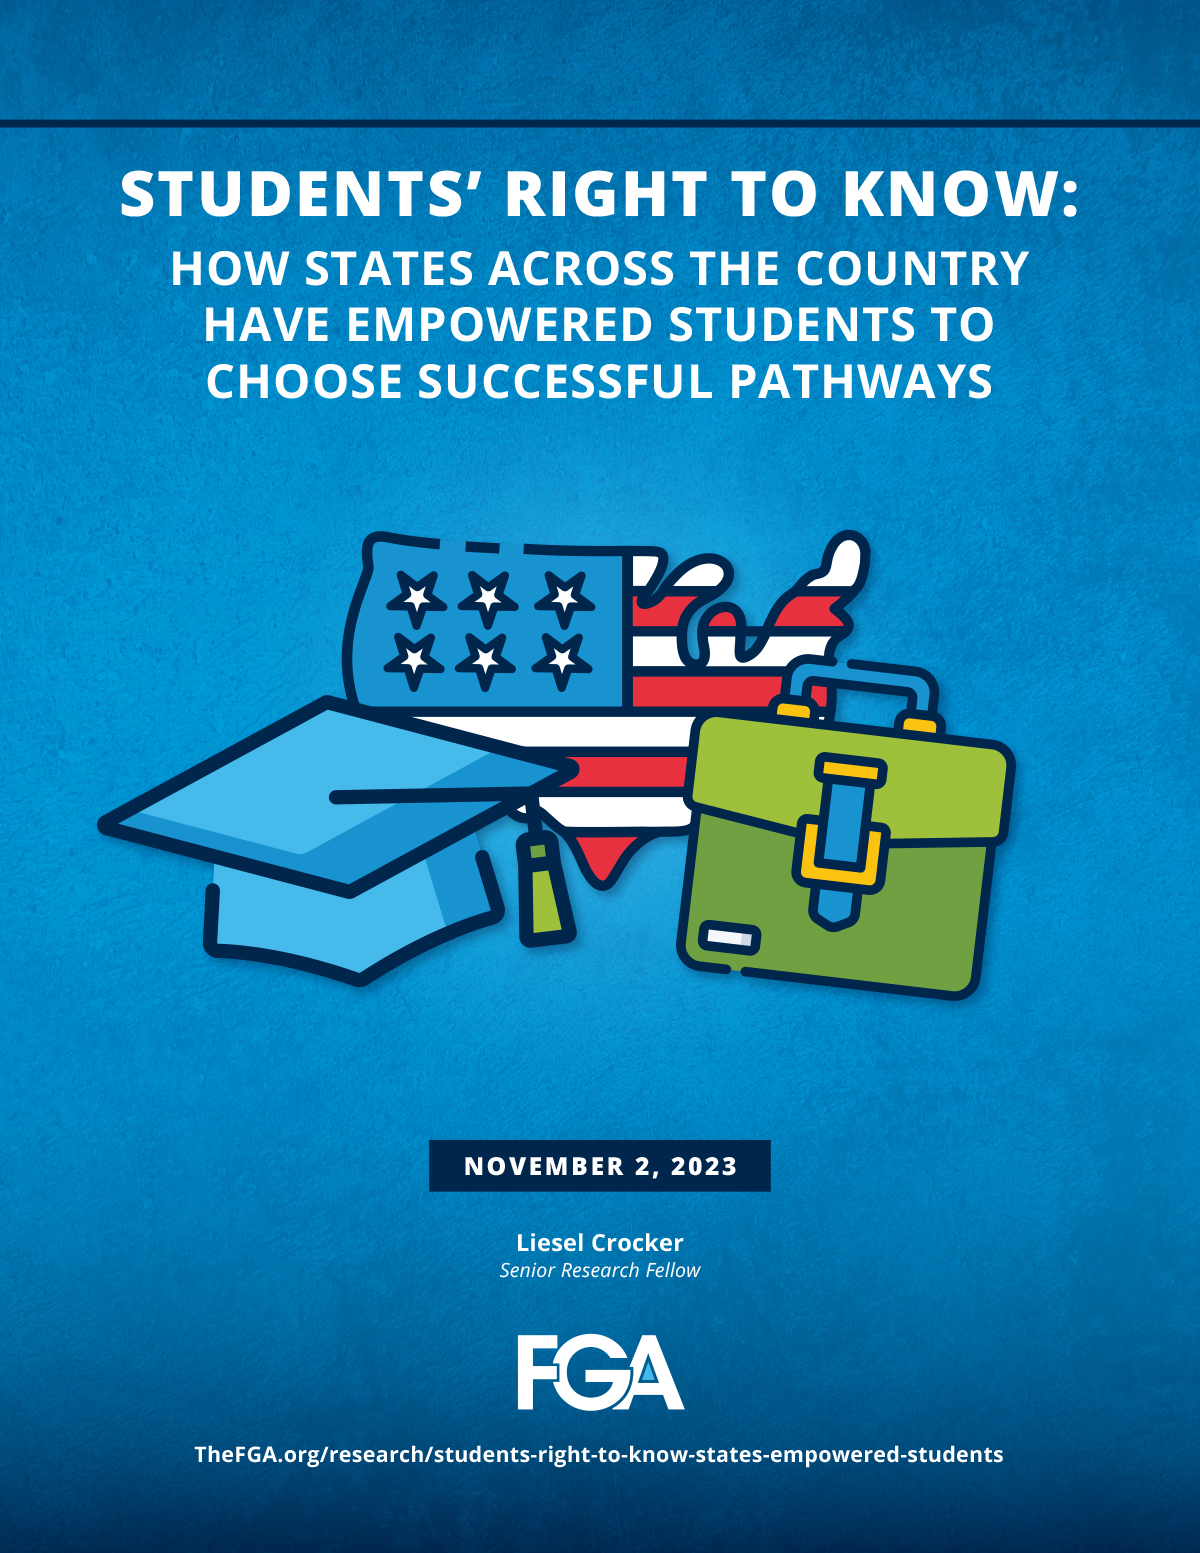 Students’ Right to Know: How States Across the Country Have Empowered Students to Choose Successful Pathways